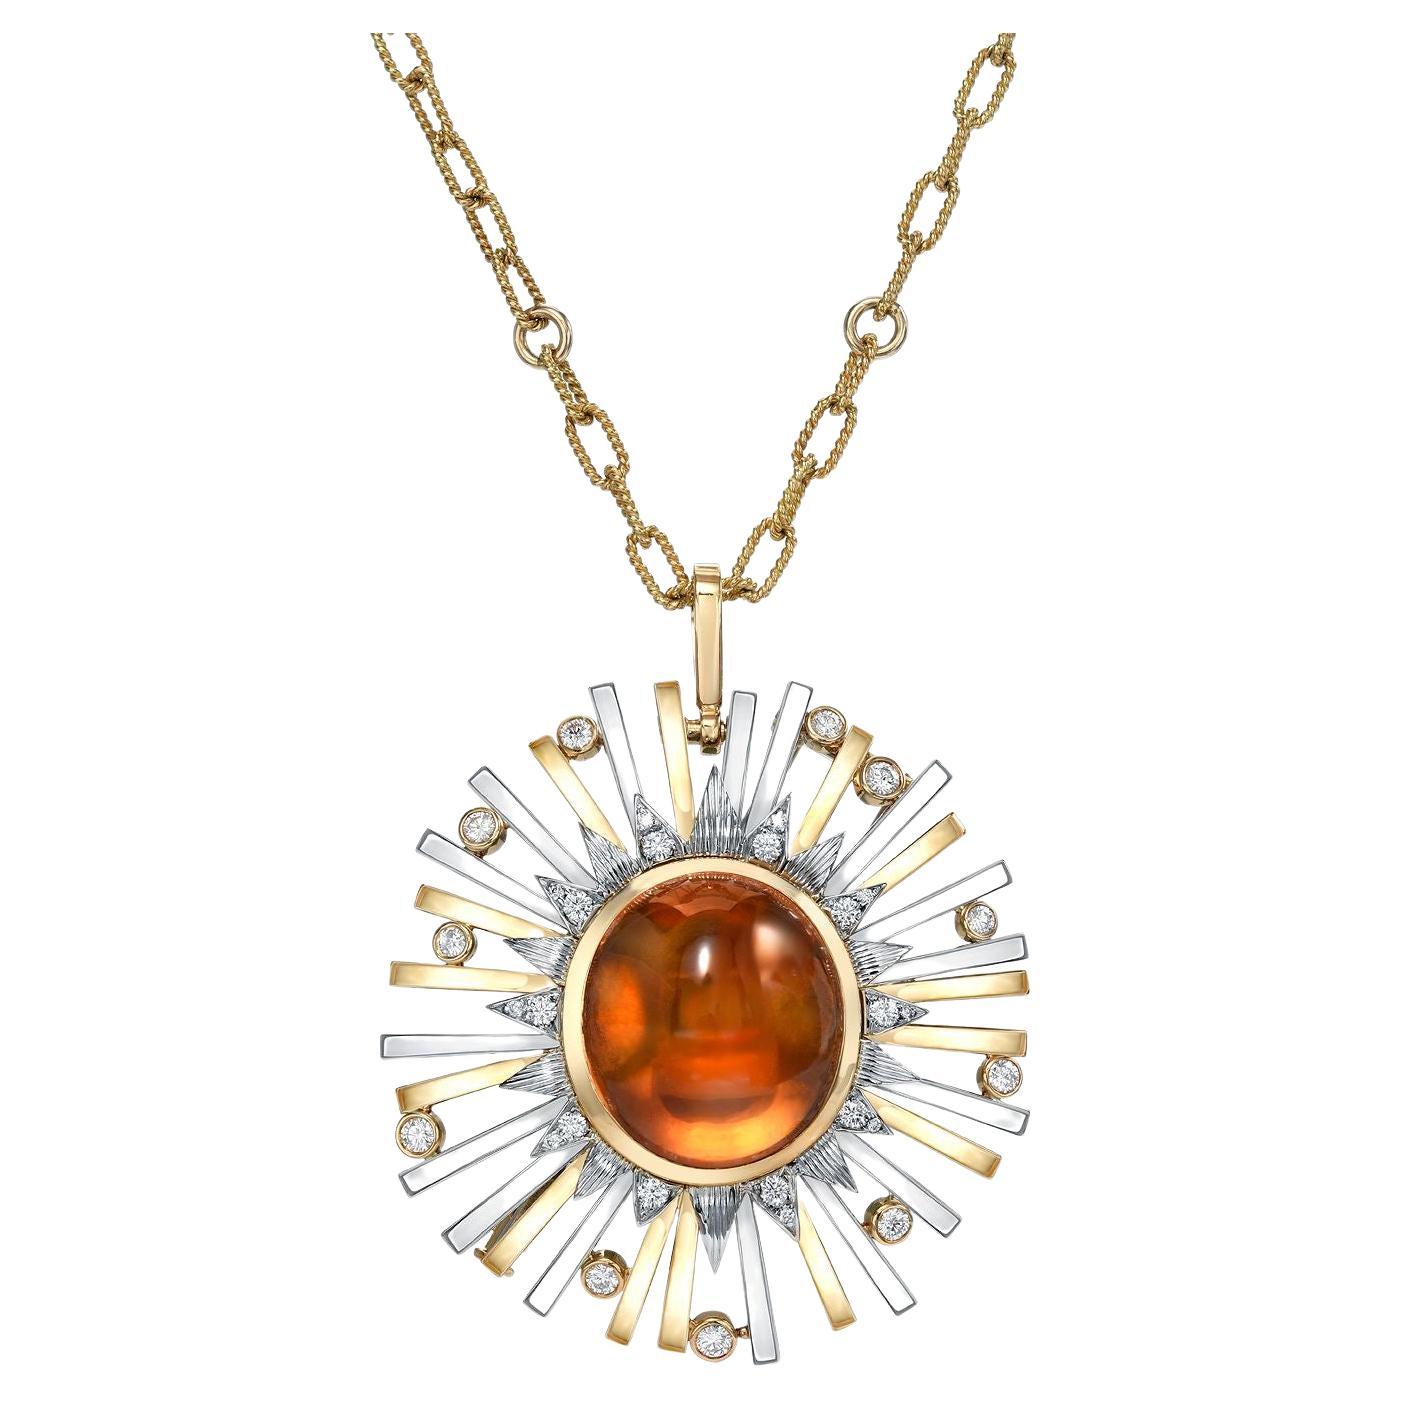 Madeira Citrine Pendant Necklace Brooch Cabochon 24.14 Carat  For Sale